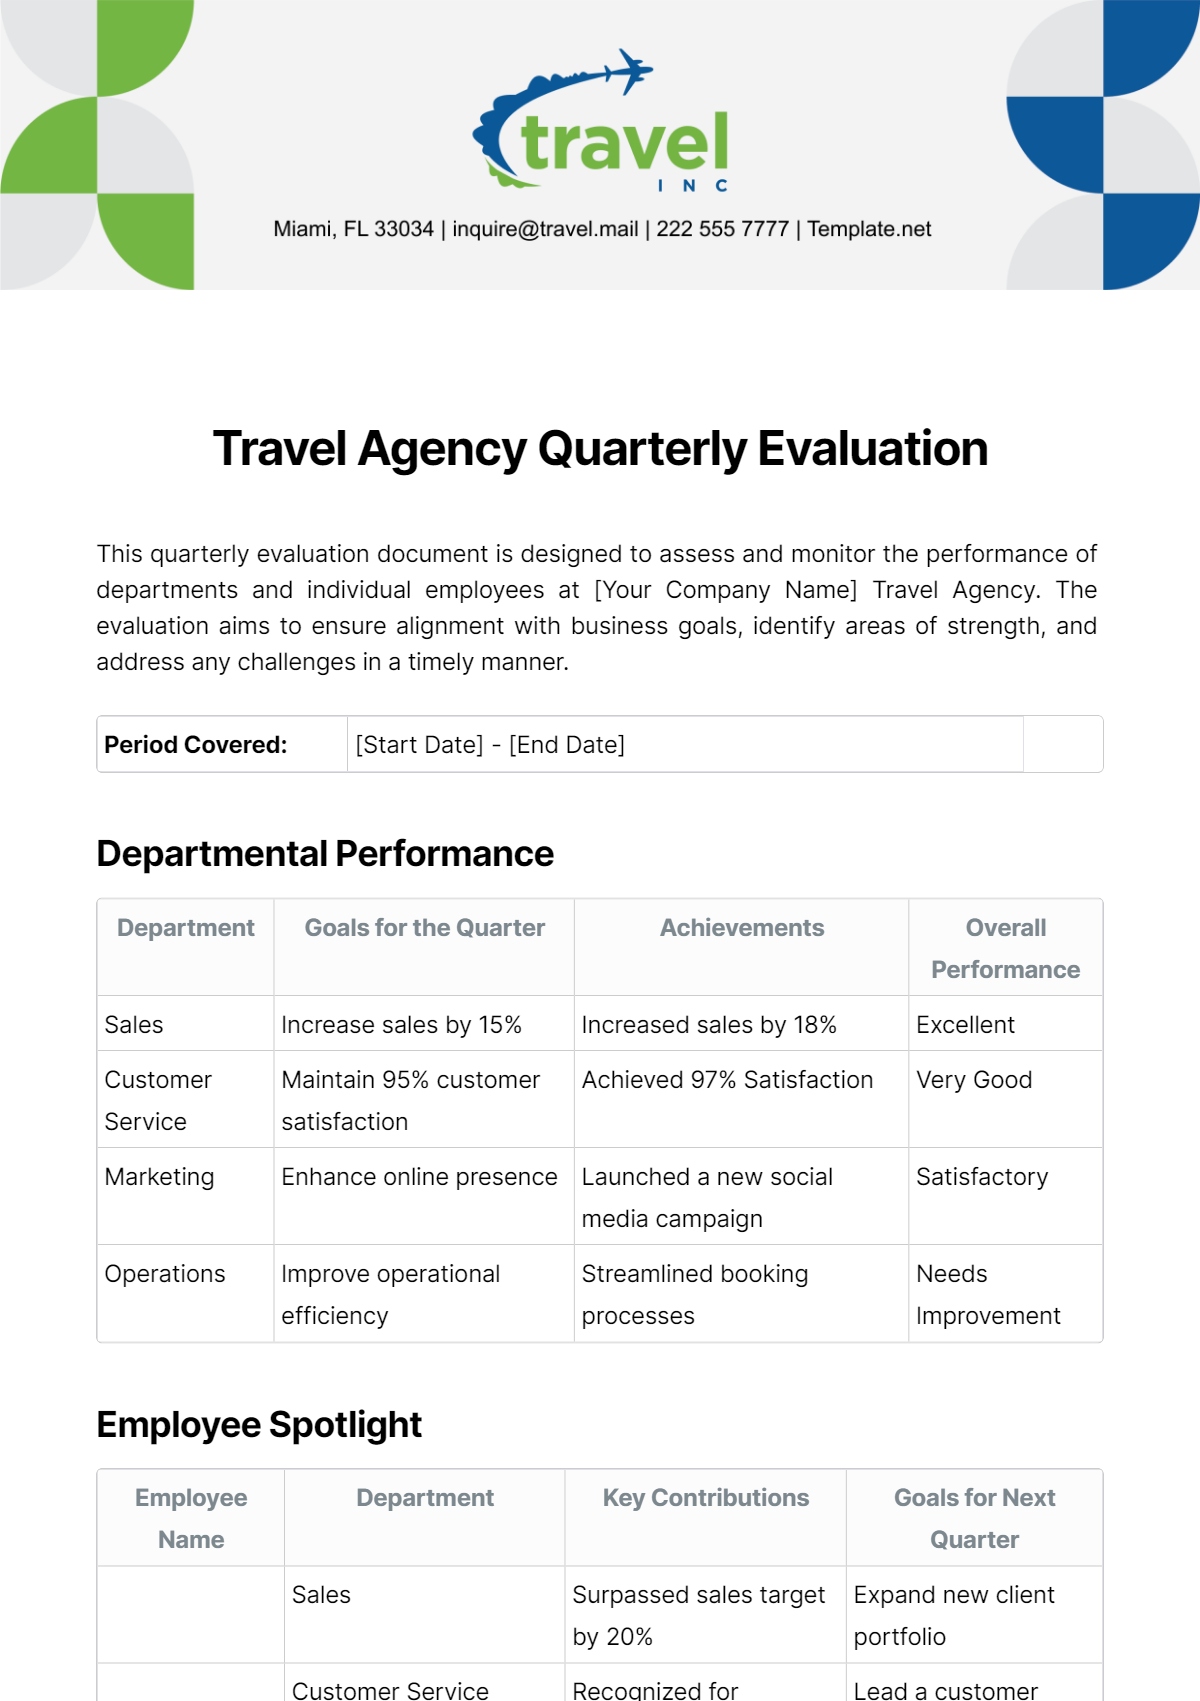 Travel Agency Quarterly Evaluation Template